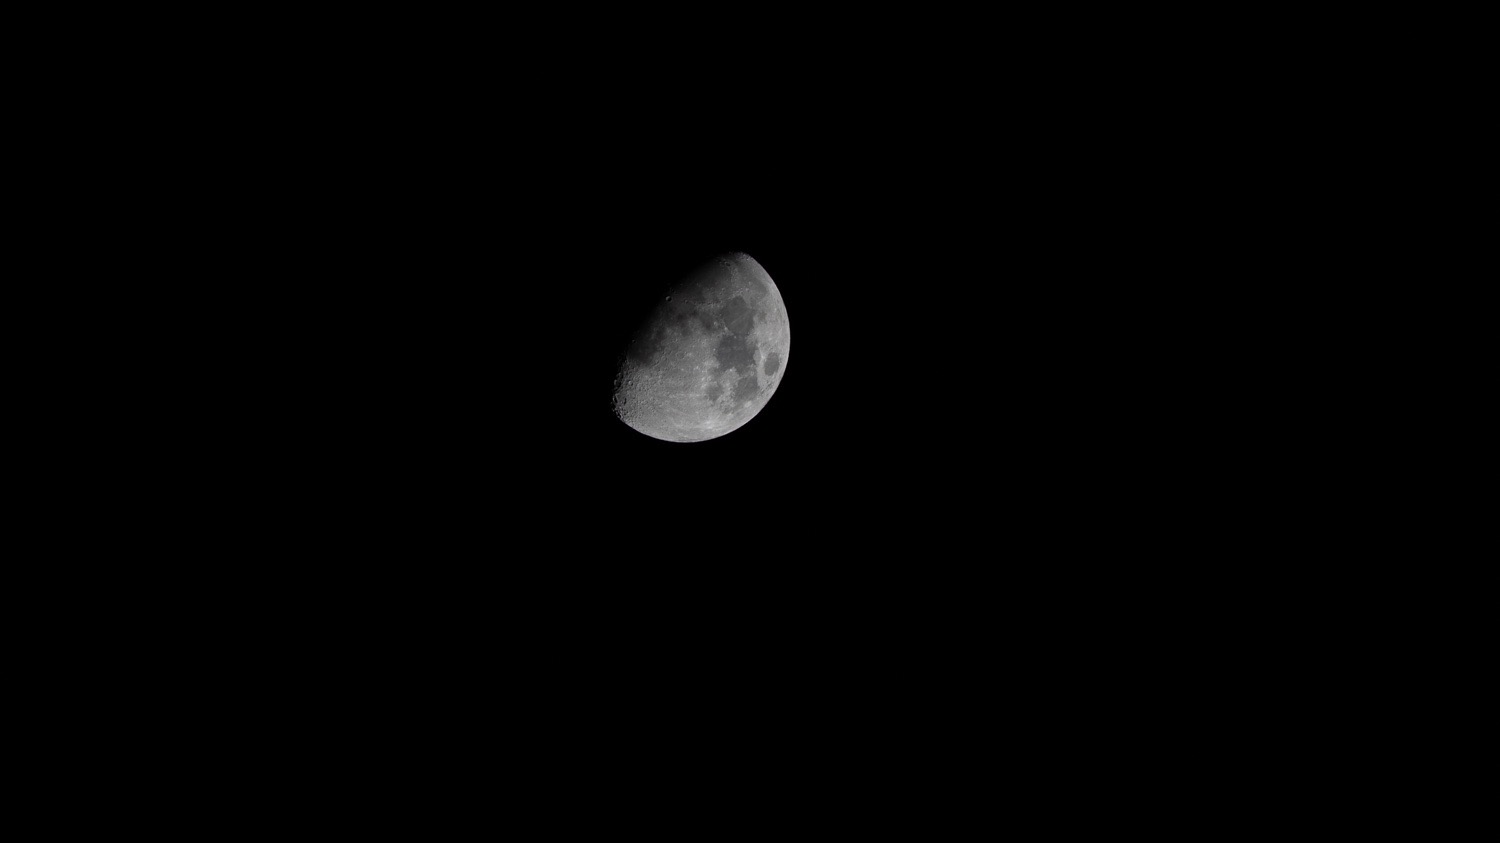 An image of the moon taken with the Sigma 150-600mm f/5-6.3 DG OS HSM